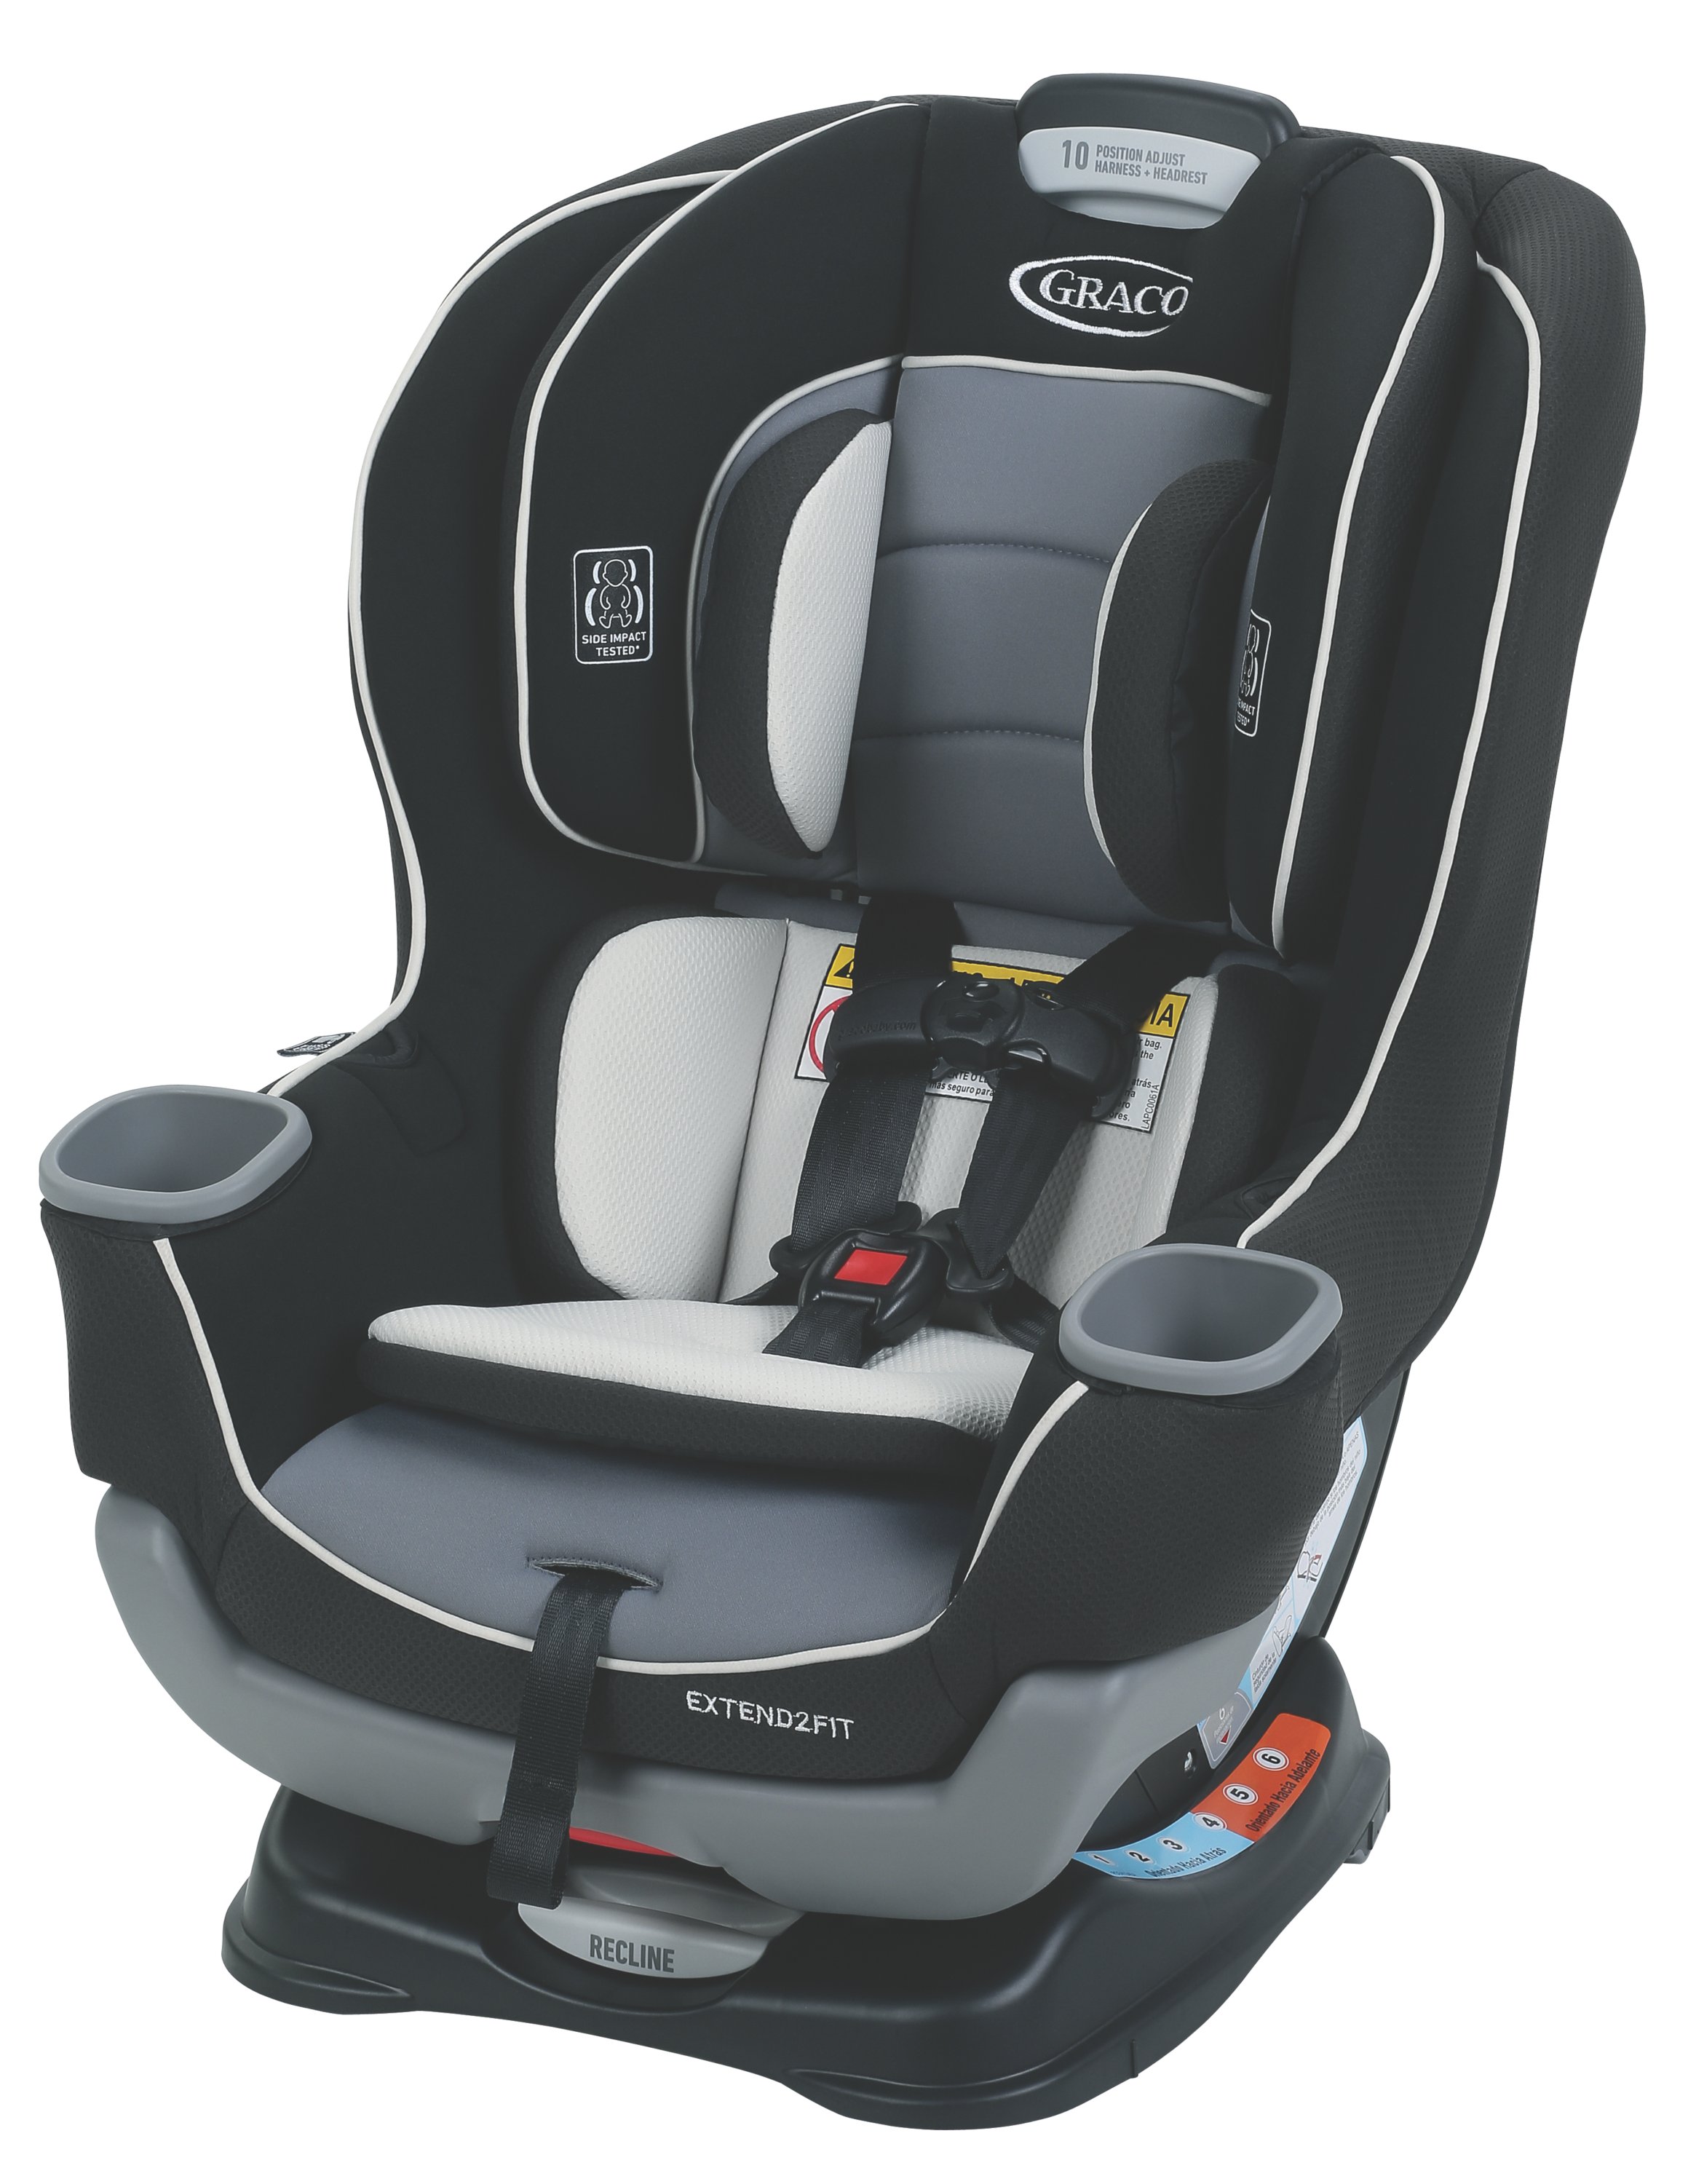 If you don't want a car seat that is SUPER EASY to install, SIMPLE